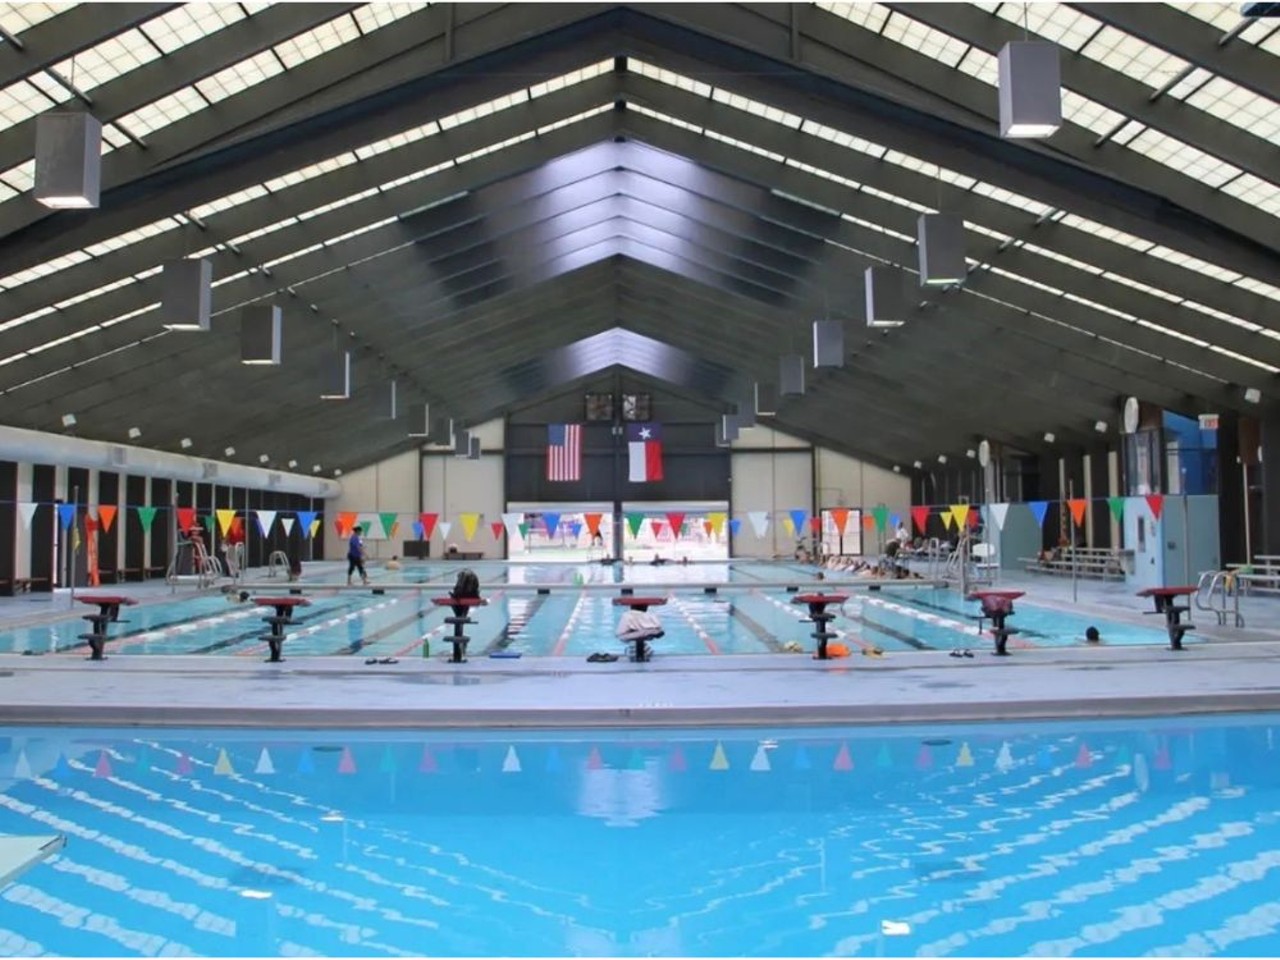 Take an indoor swim at San Antonio Natatorium
1420 W. Cesar E. Chavez Blvd., sanantonio.gov
If it’s too hot for you to consider going to an outdoor water feature, you can swim at the  San Antonio Natatorium's indoor facility. It's the best of both worlds!